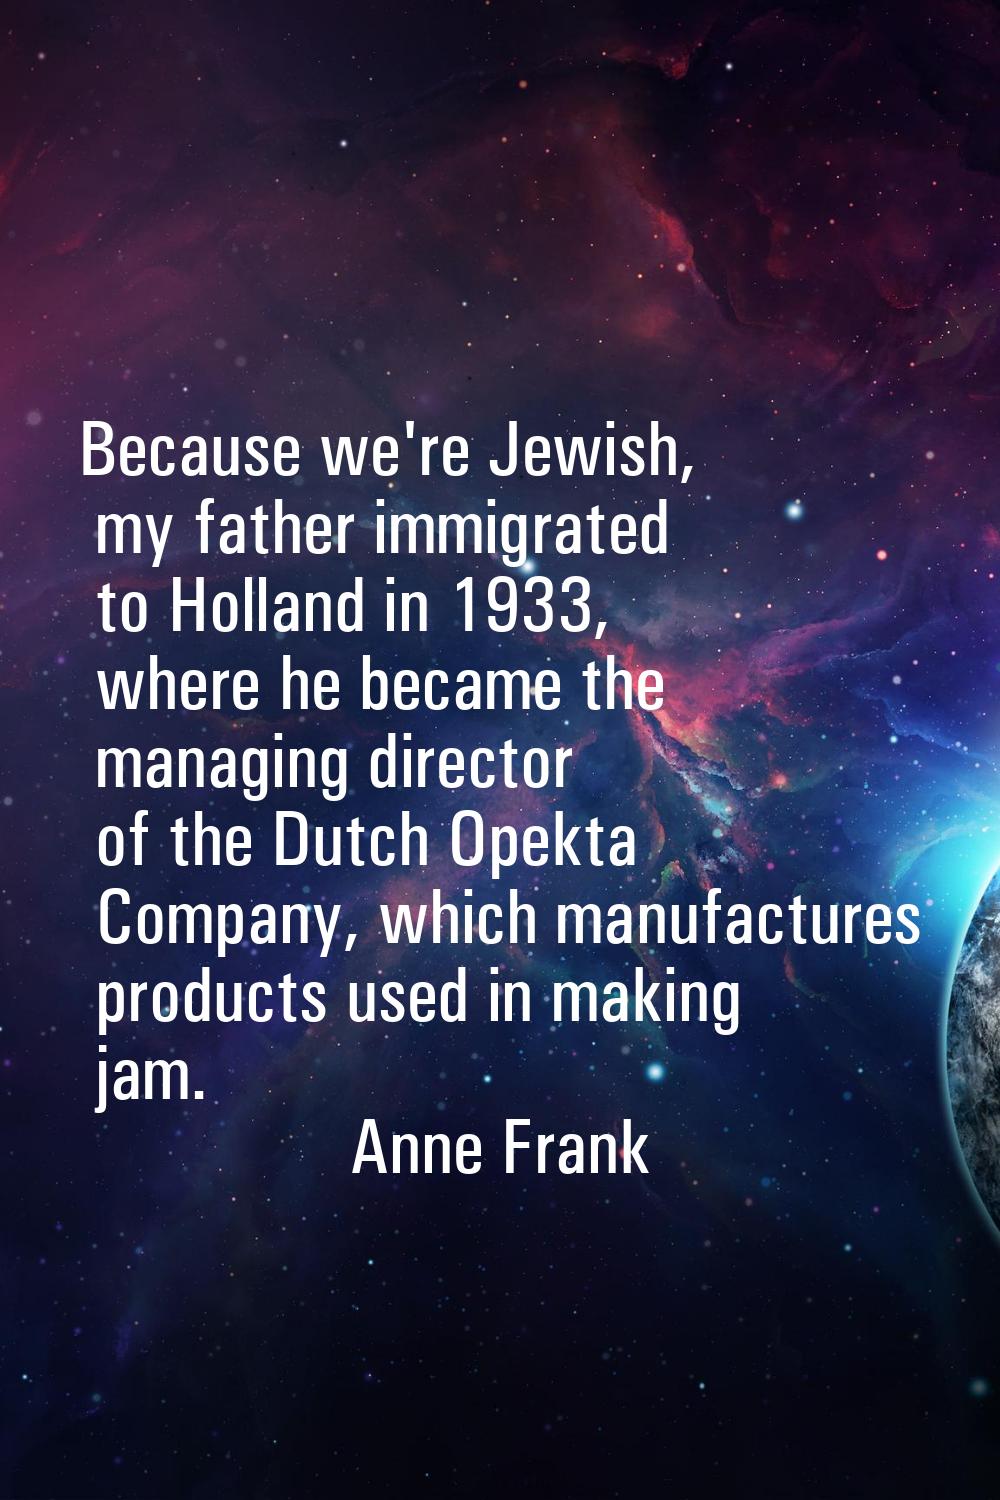 Because we're Jewish, my father immigrated to Holland in 1933, where he became the managing directo